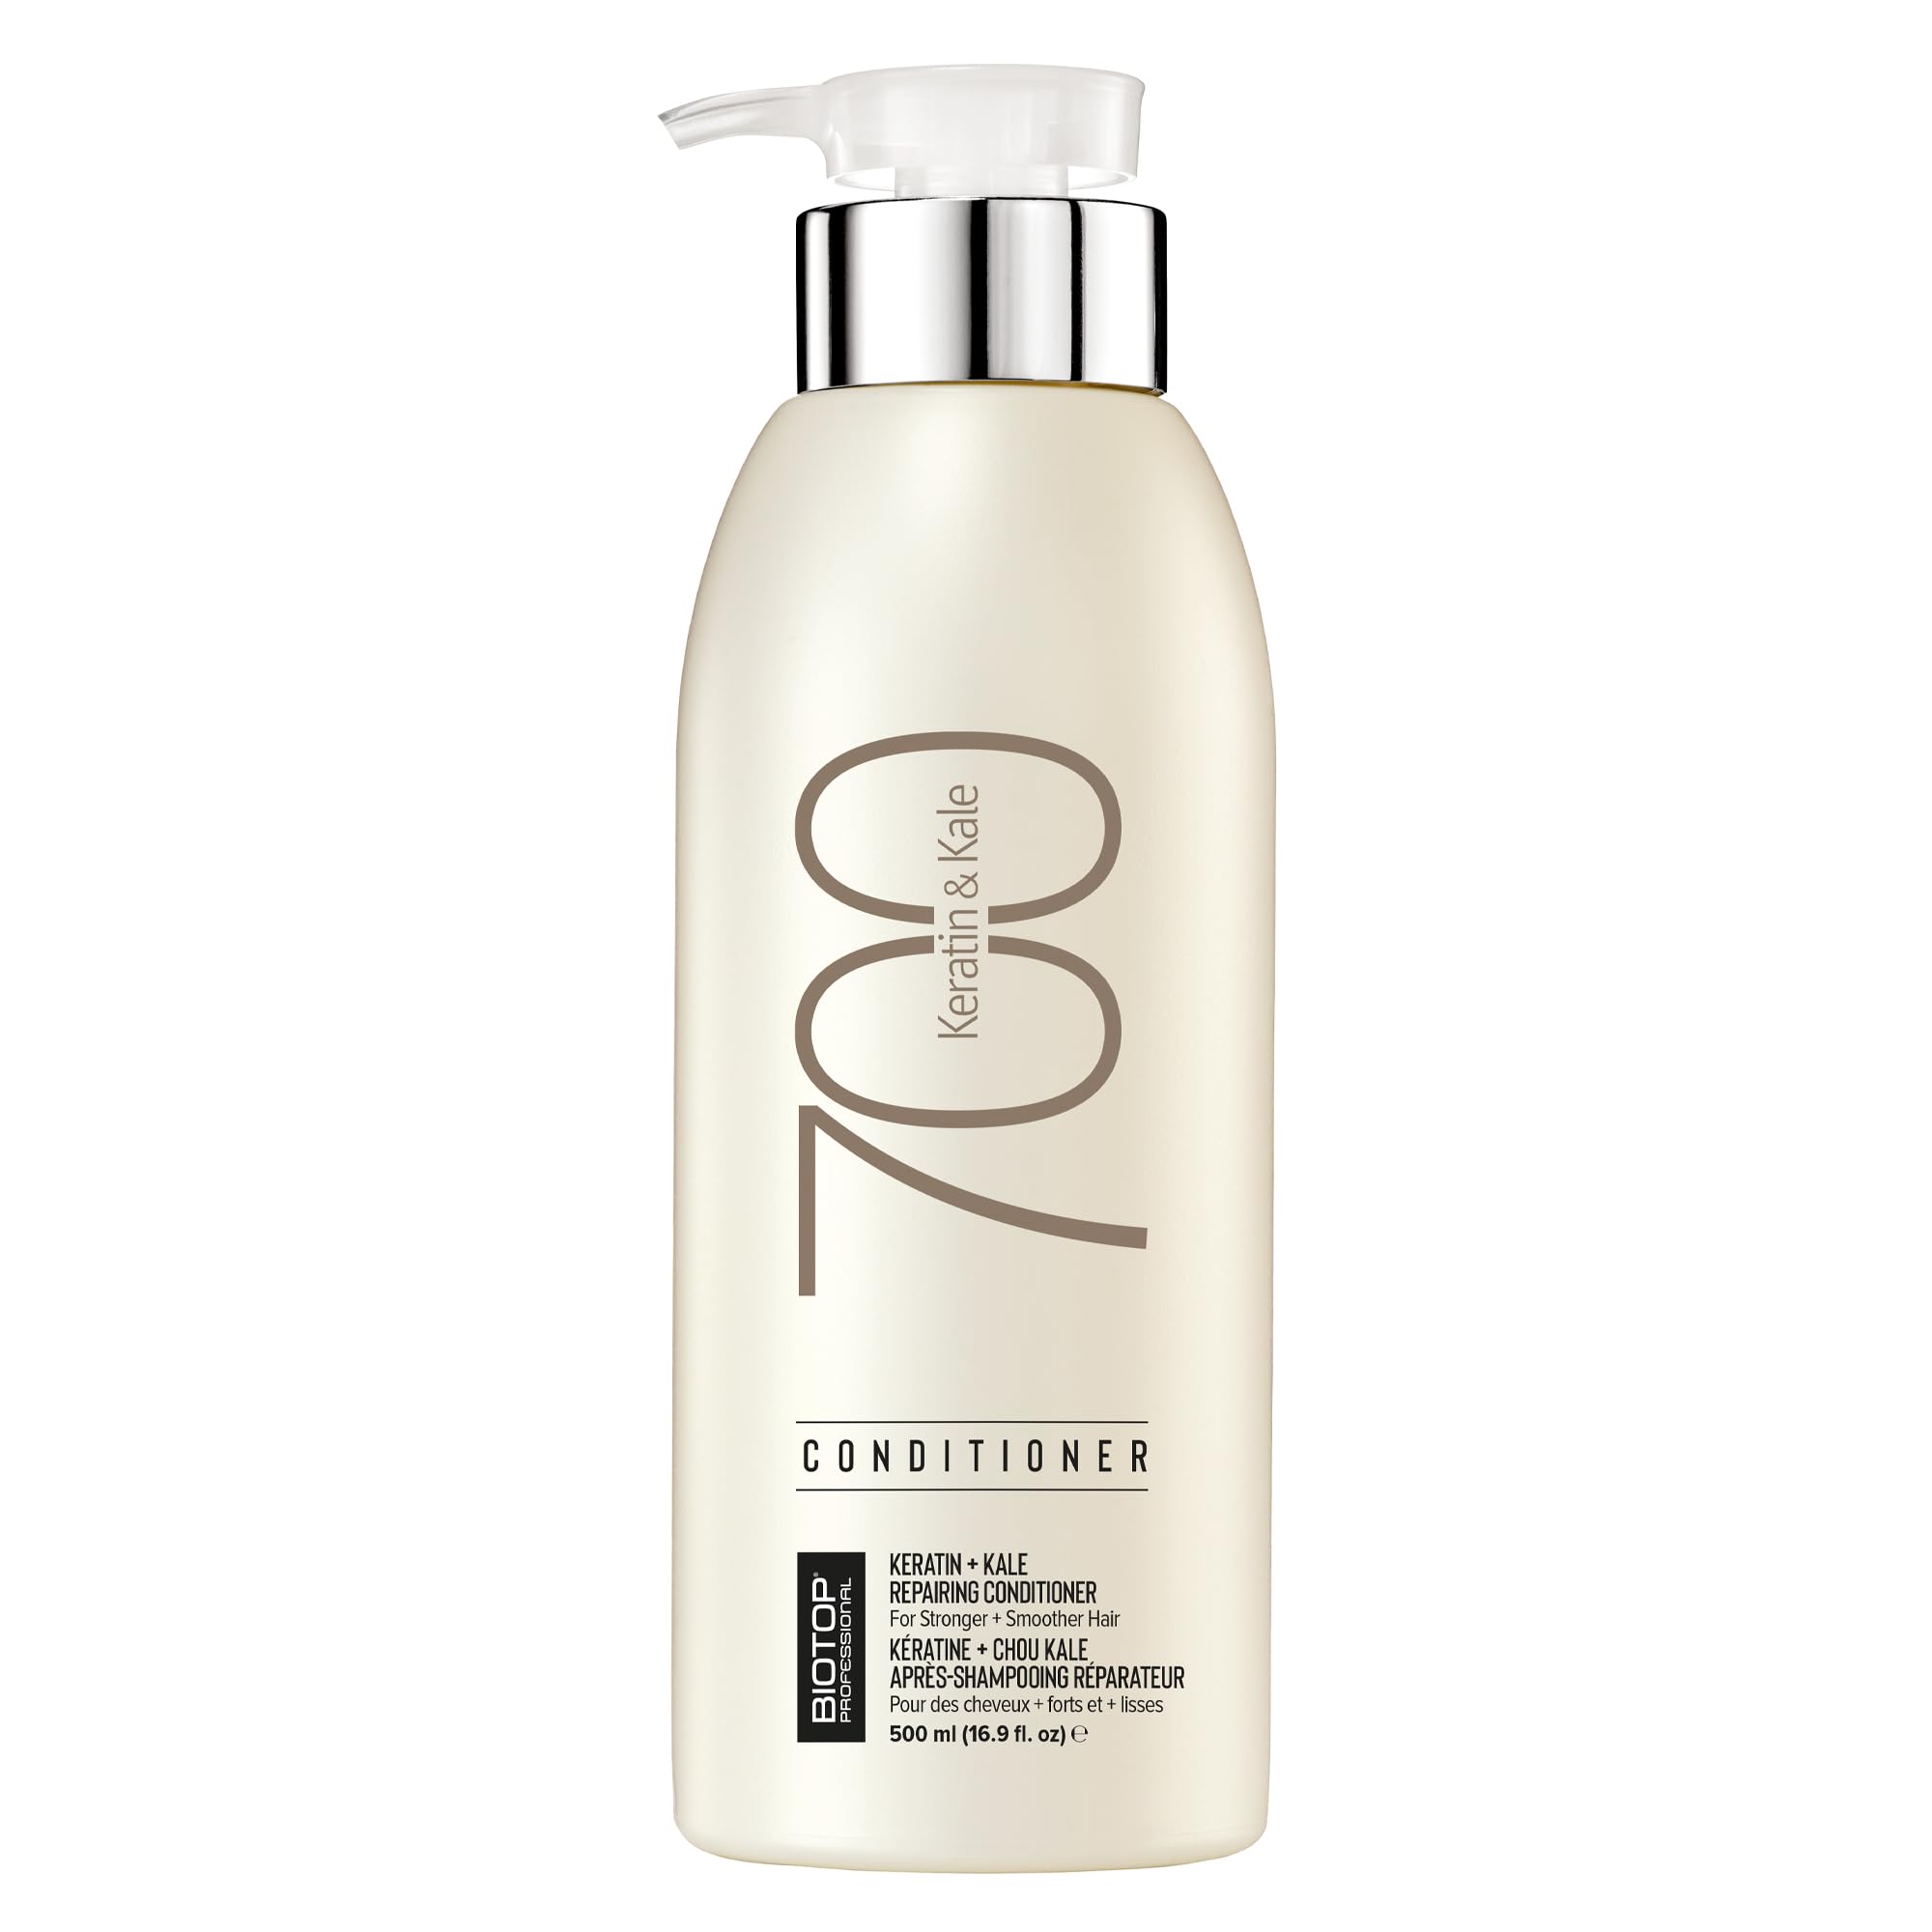 Biotop Professional 700 Keratin + Kale Hair Conditioner - Made With Vitamin E to Soften & Strengthen Strands - Nourishing + Moisturizing Conditioner for Damaged Hair - 16.9 oz